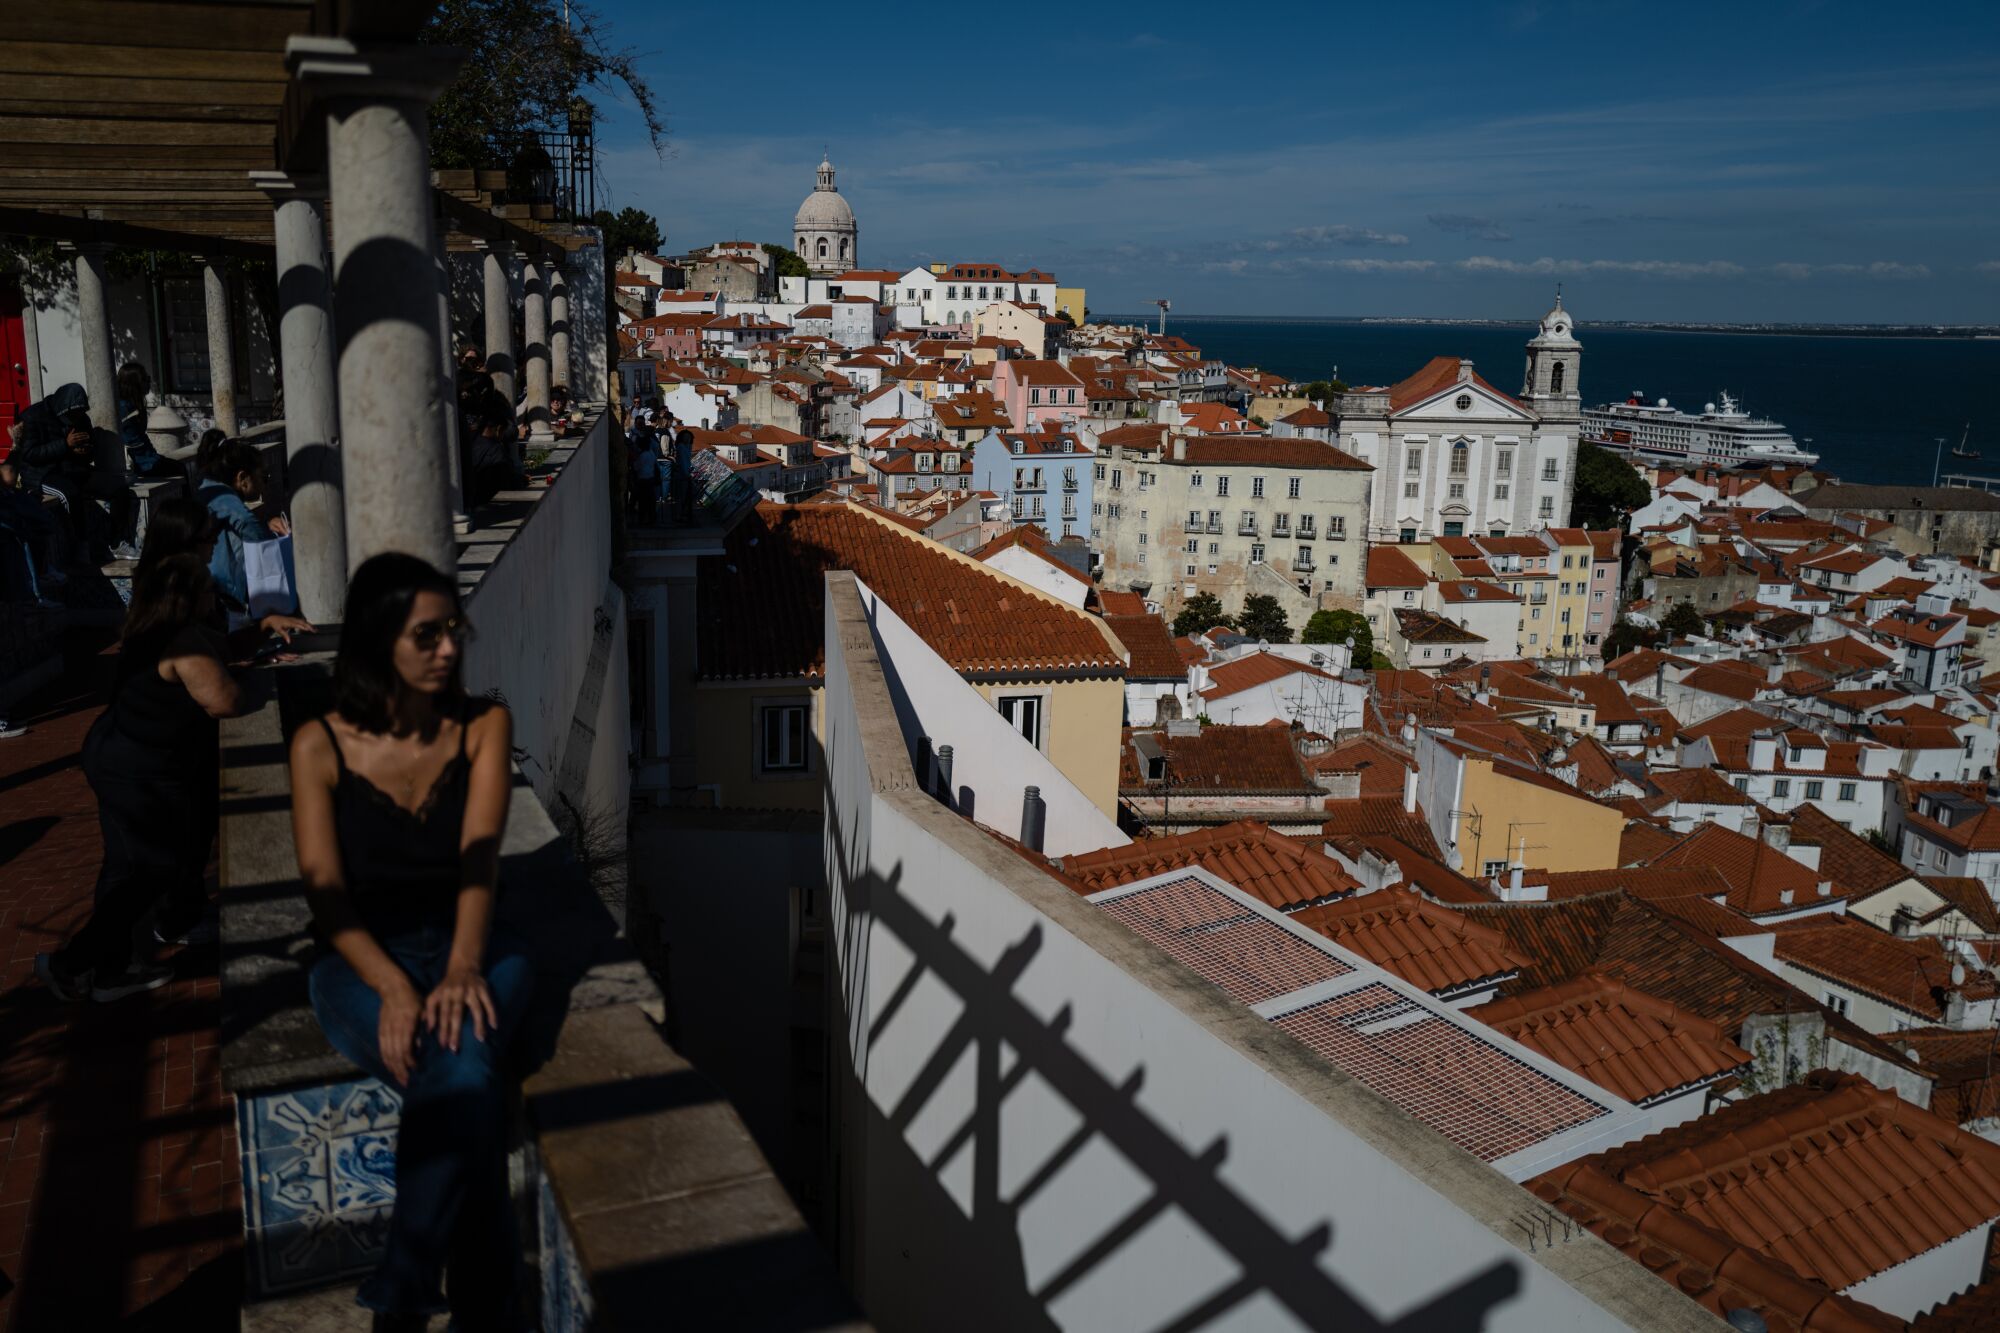 A woman, seated, takes in a view of rooftops and the ocean 